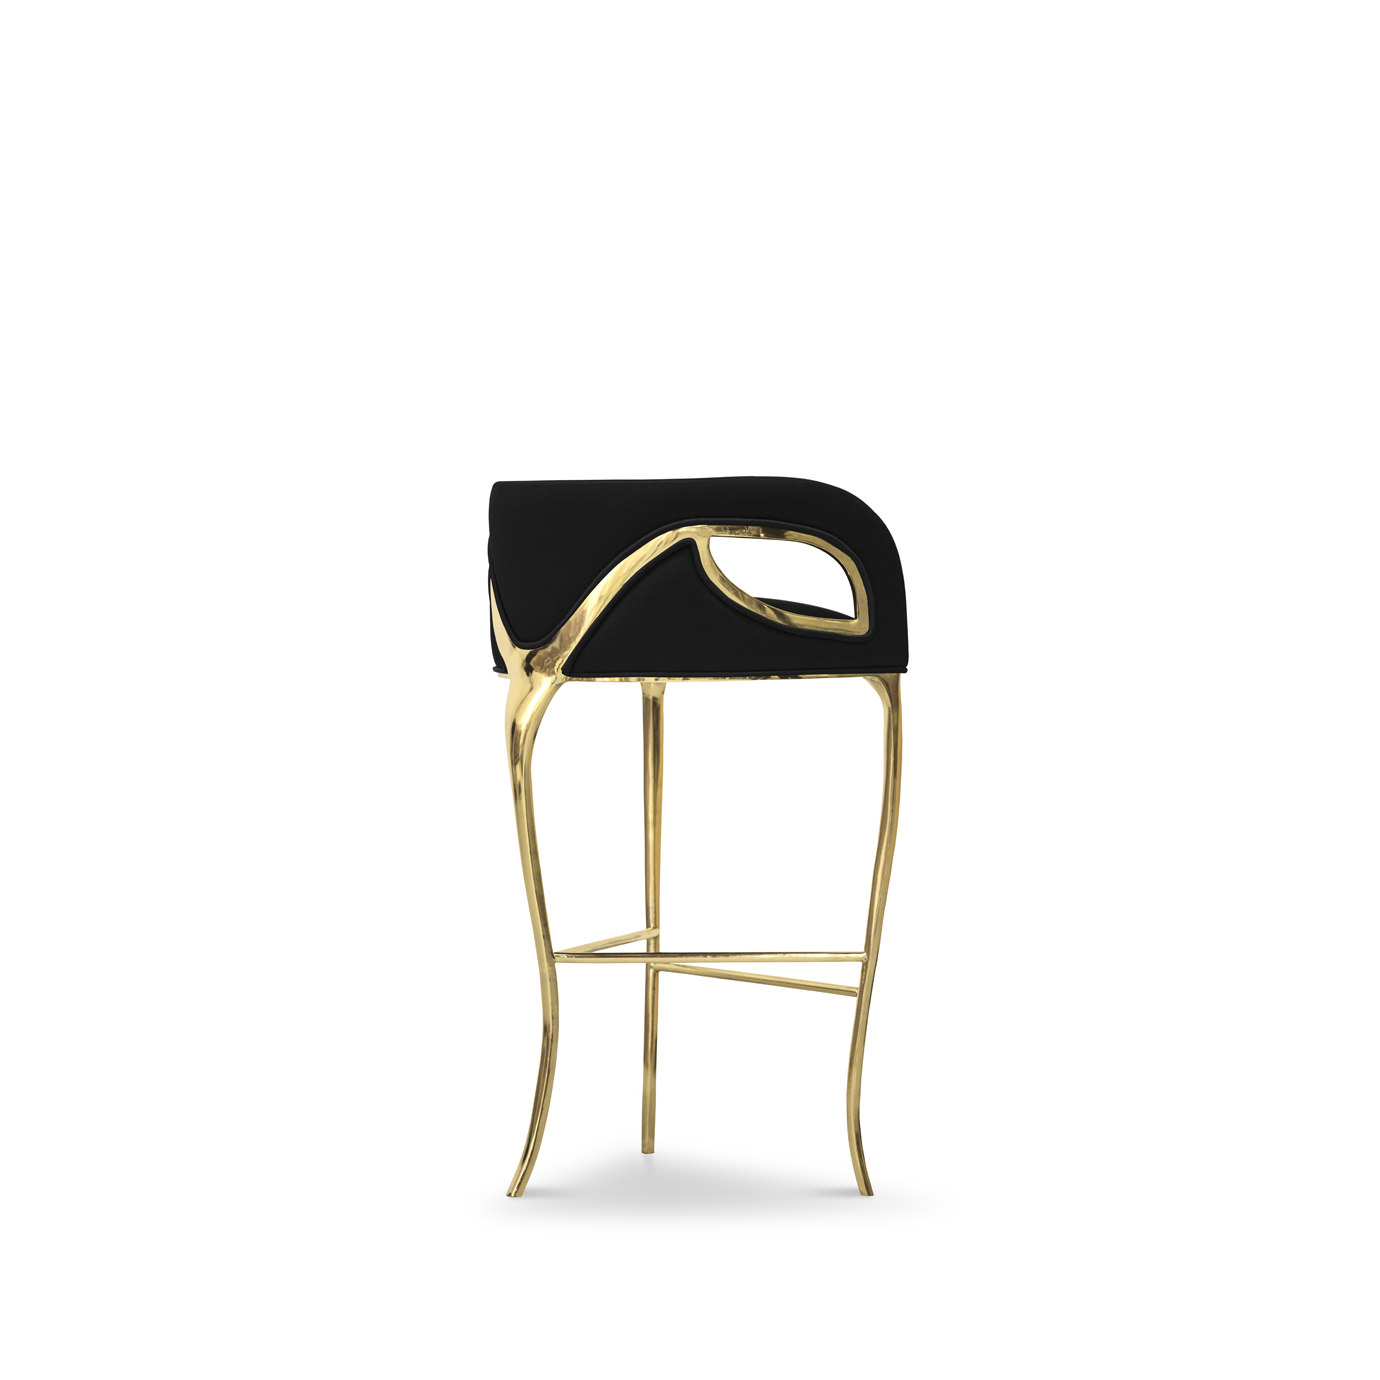 gold and black chandra bar stool kitchen glamour parisian eclectic style